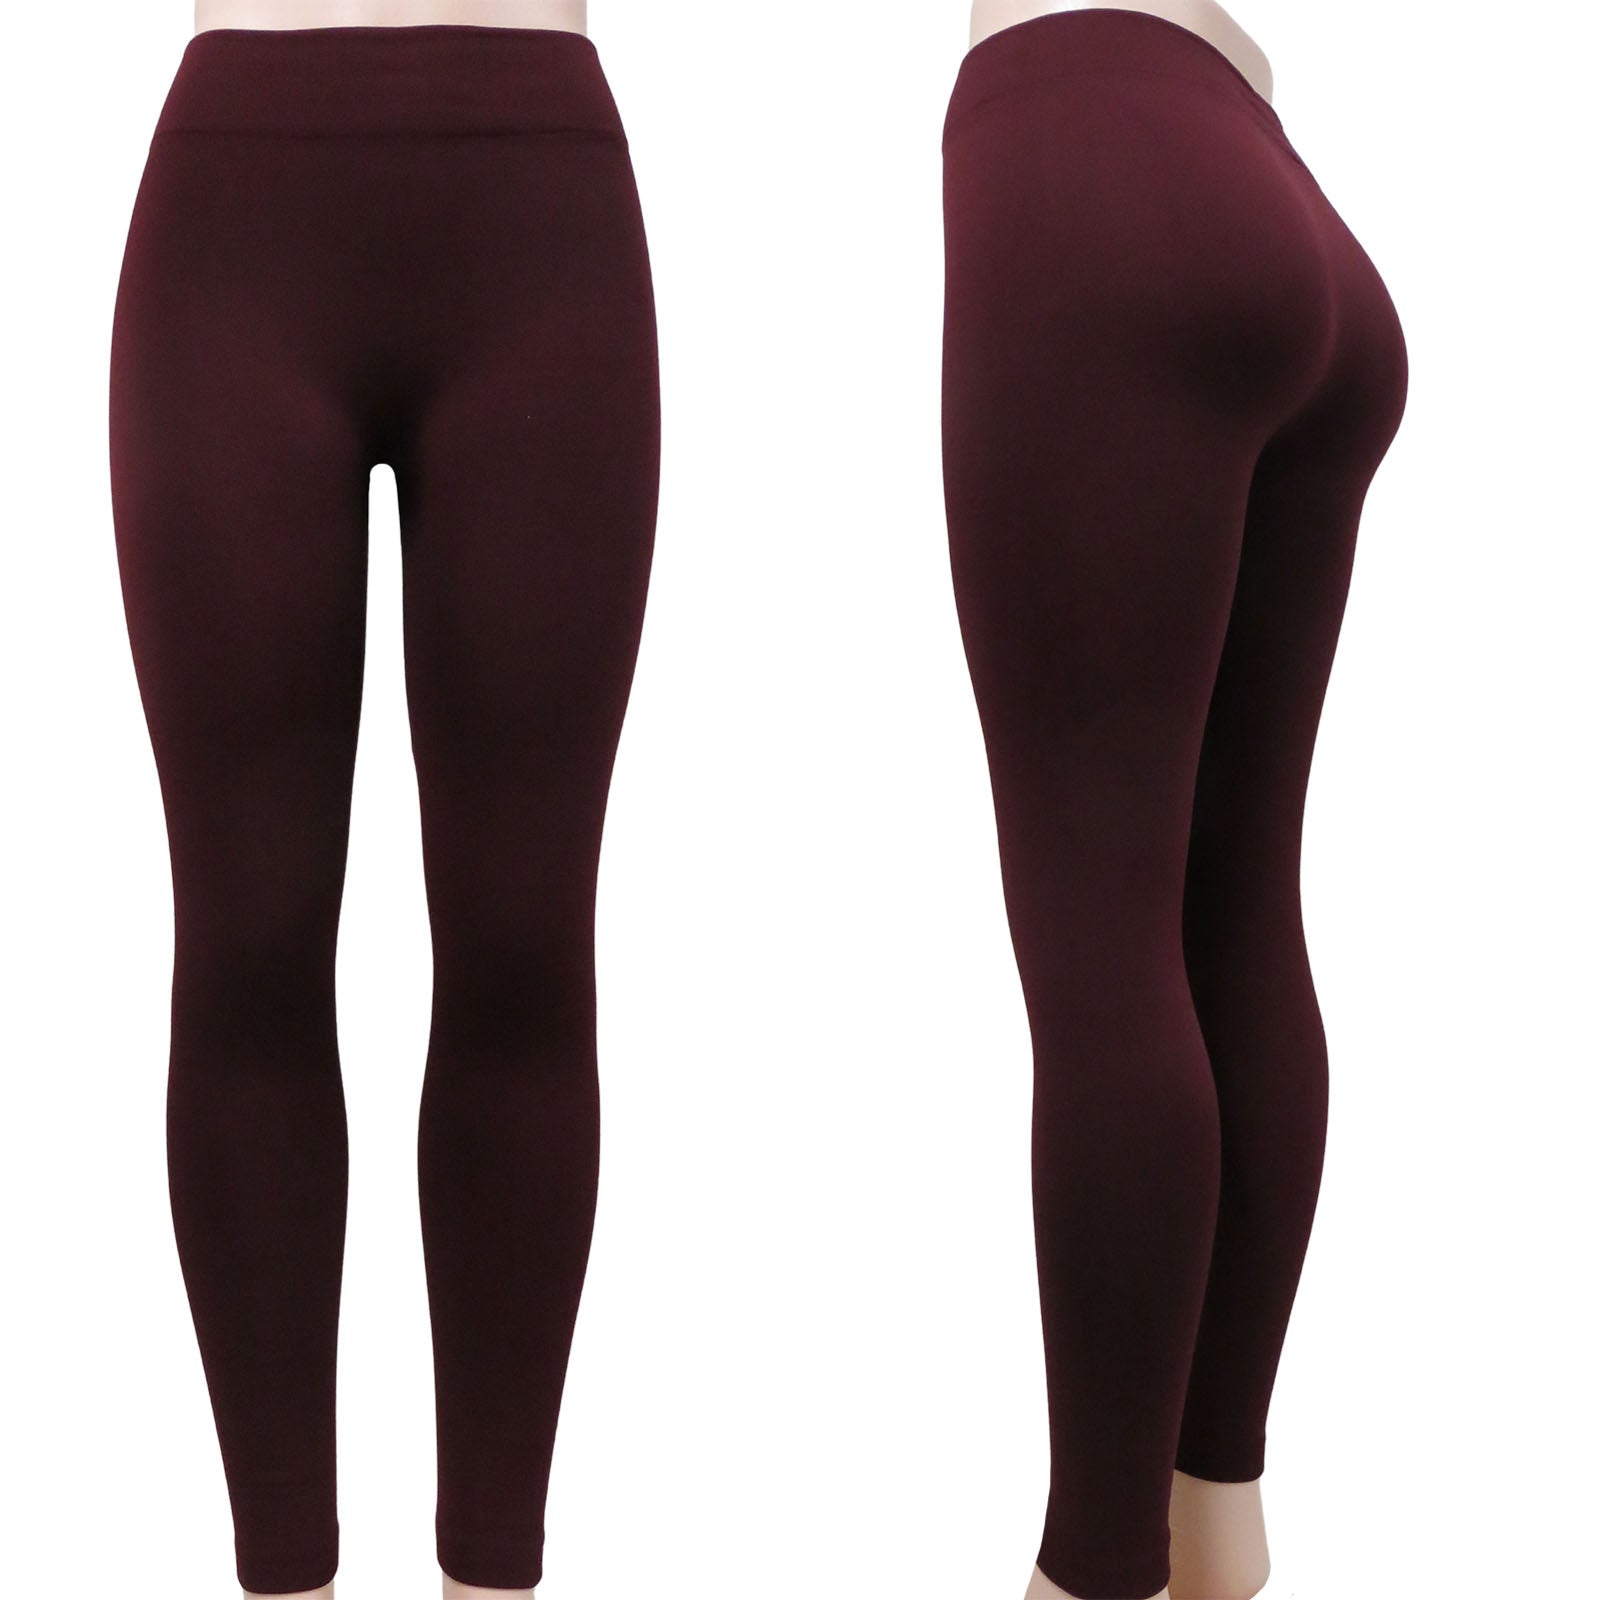 Gradient Color Energy Workout Leggings For Women For Women Perfect For  Fitness, Jogging, Running, Gym, And Yoga From Dhgatebeste, $10.78 |  DHgate.Com